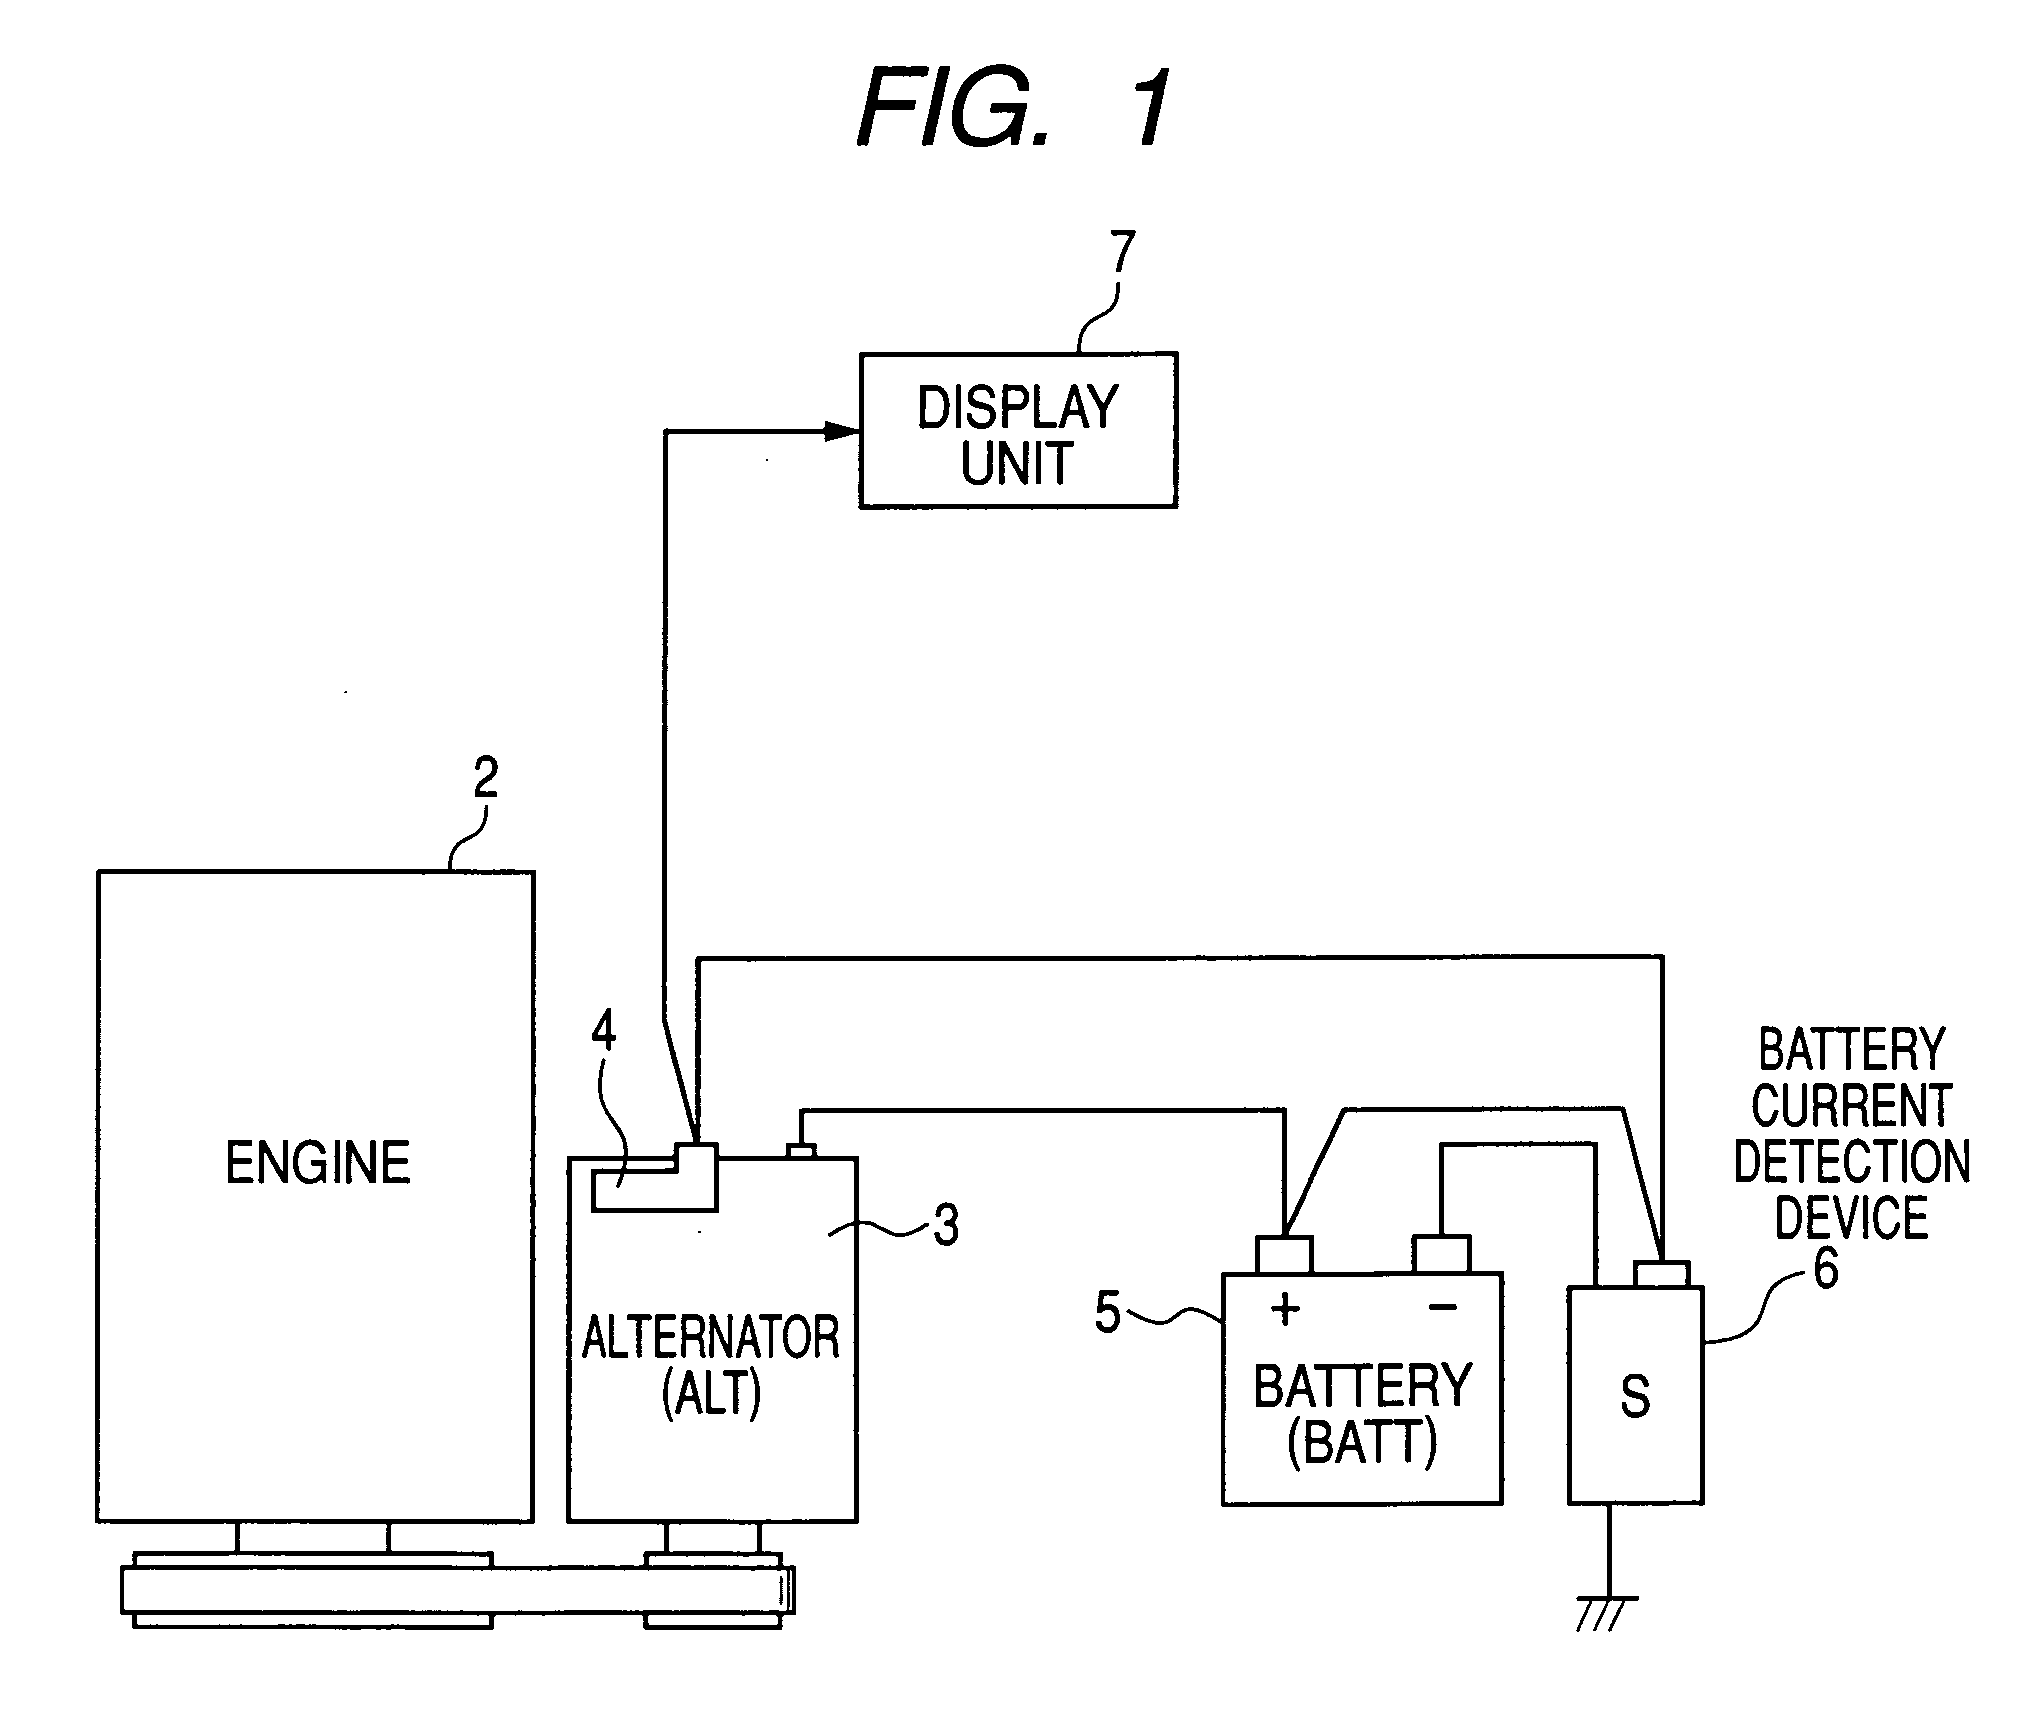 Vehicle control system capable of controlling electric-power generation state of vehicle alternator